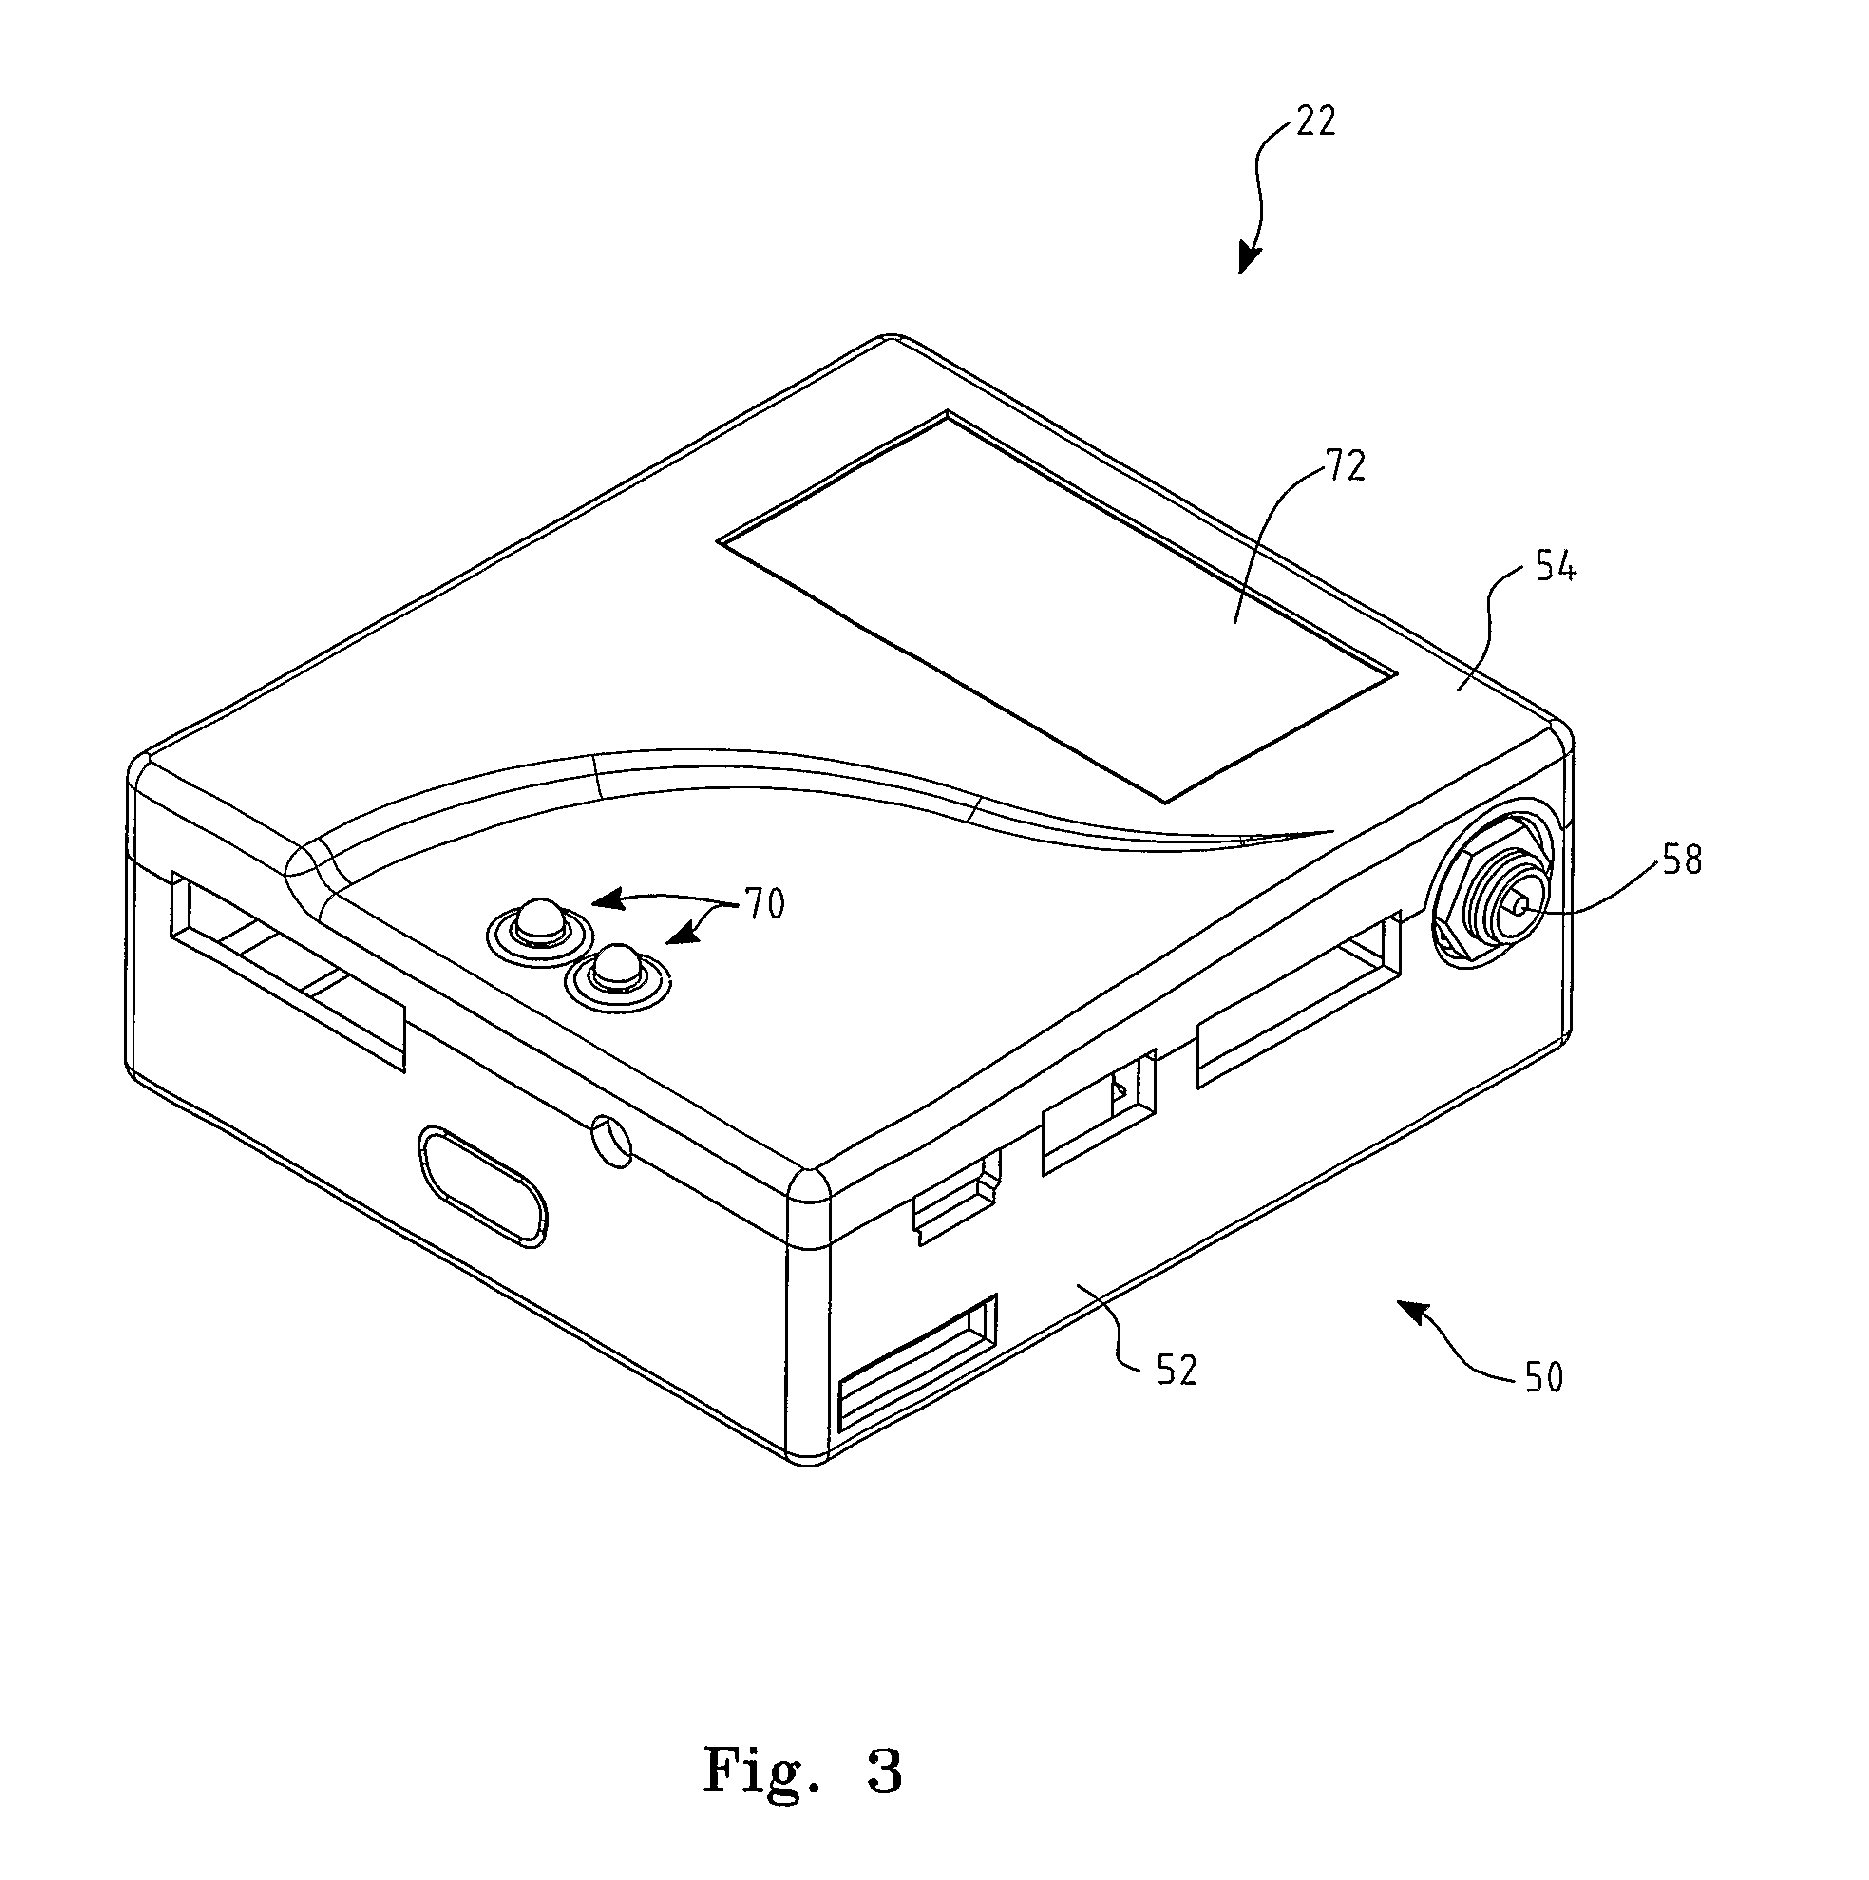 Monitoring apparatus and system